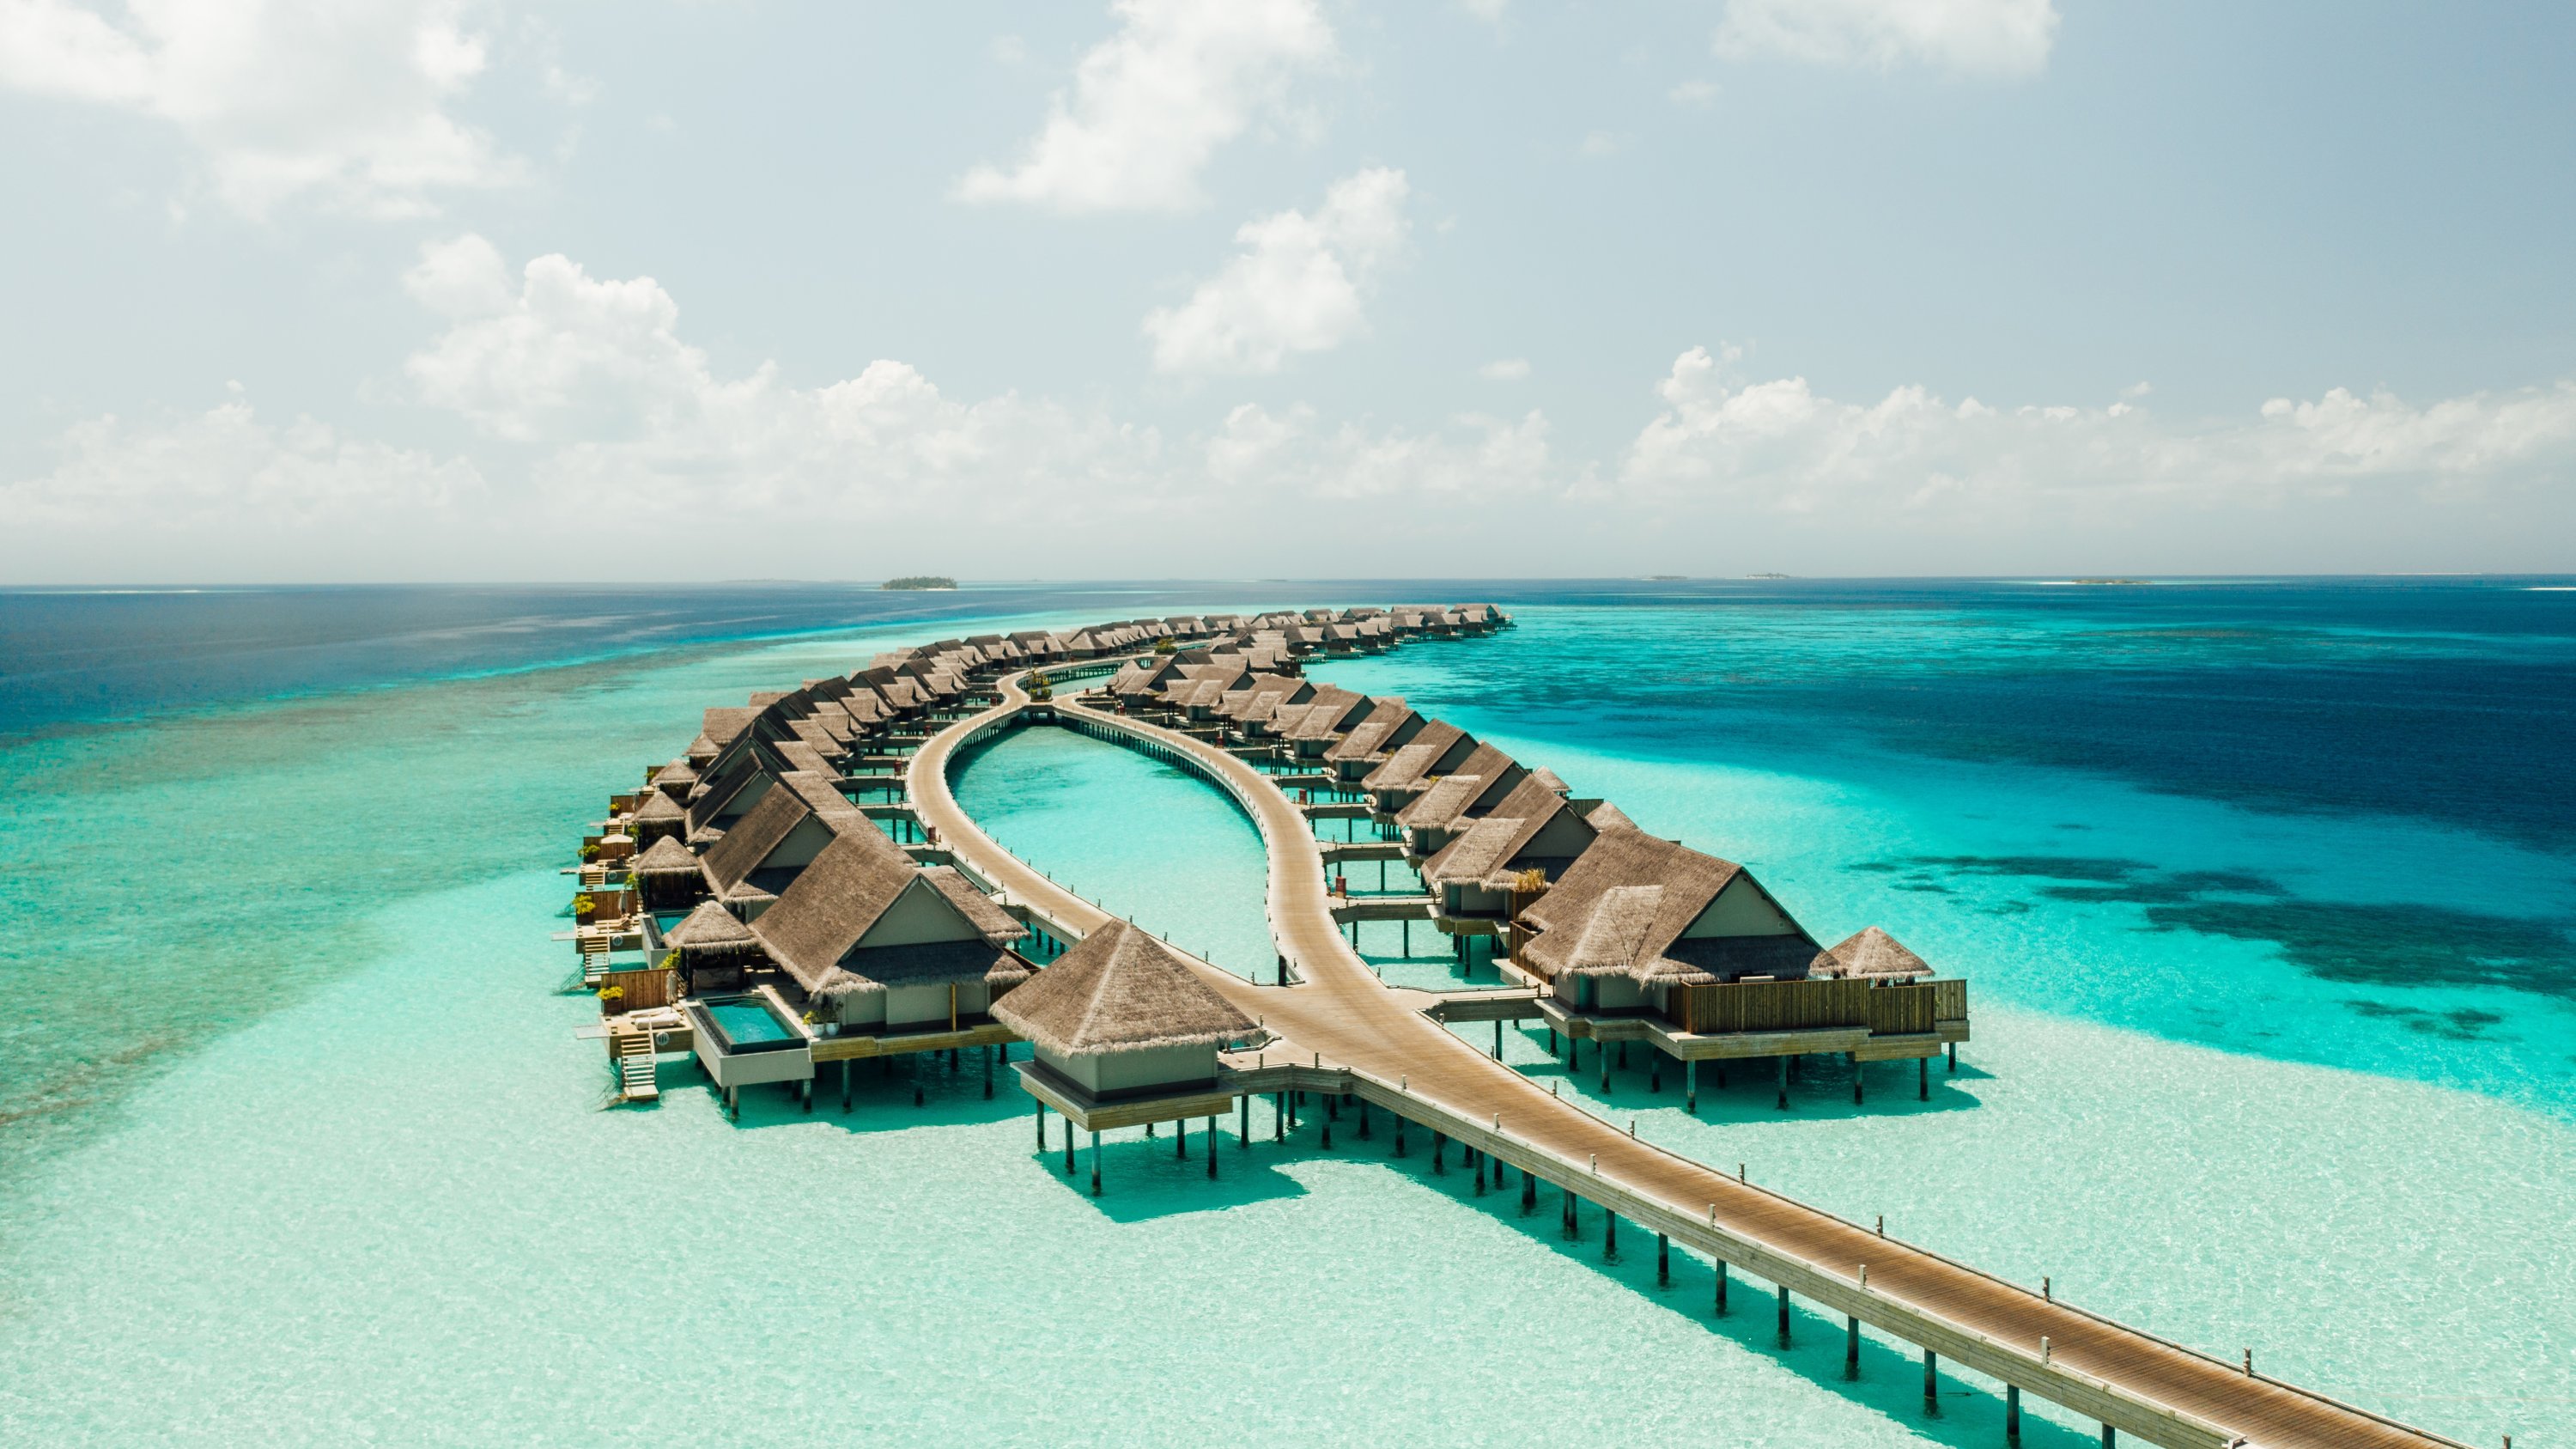 The 49 water villas in Joali all have infinity pools and their sizes range from 240 square meters to 990 square meters. (Photo courtesy of Joali Maldives)